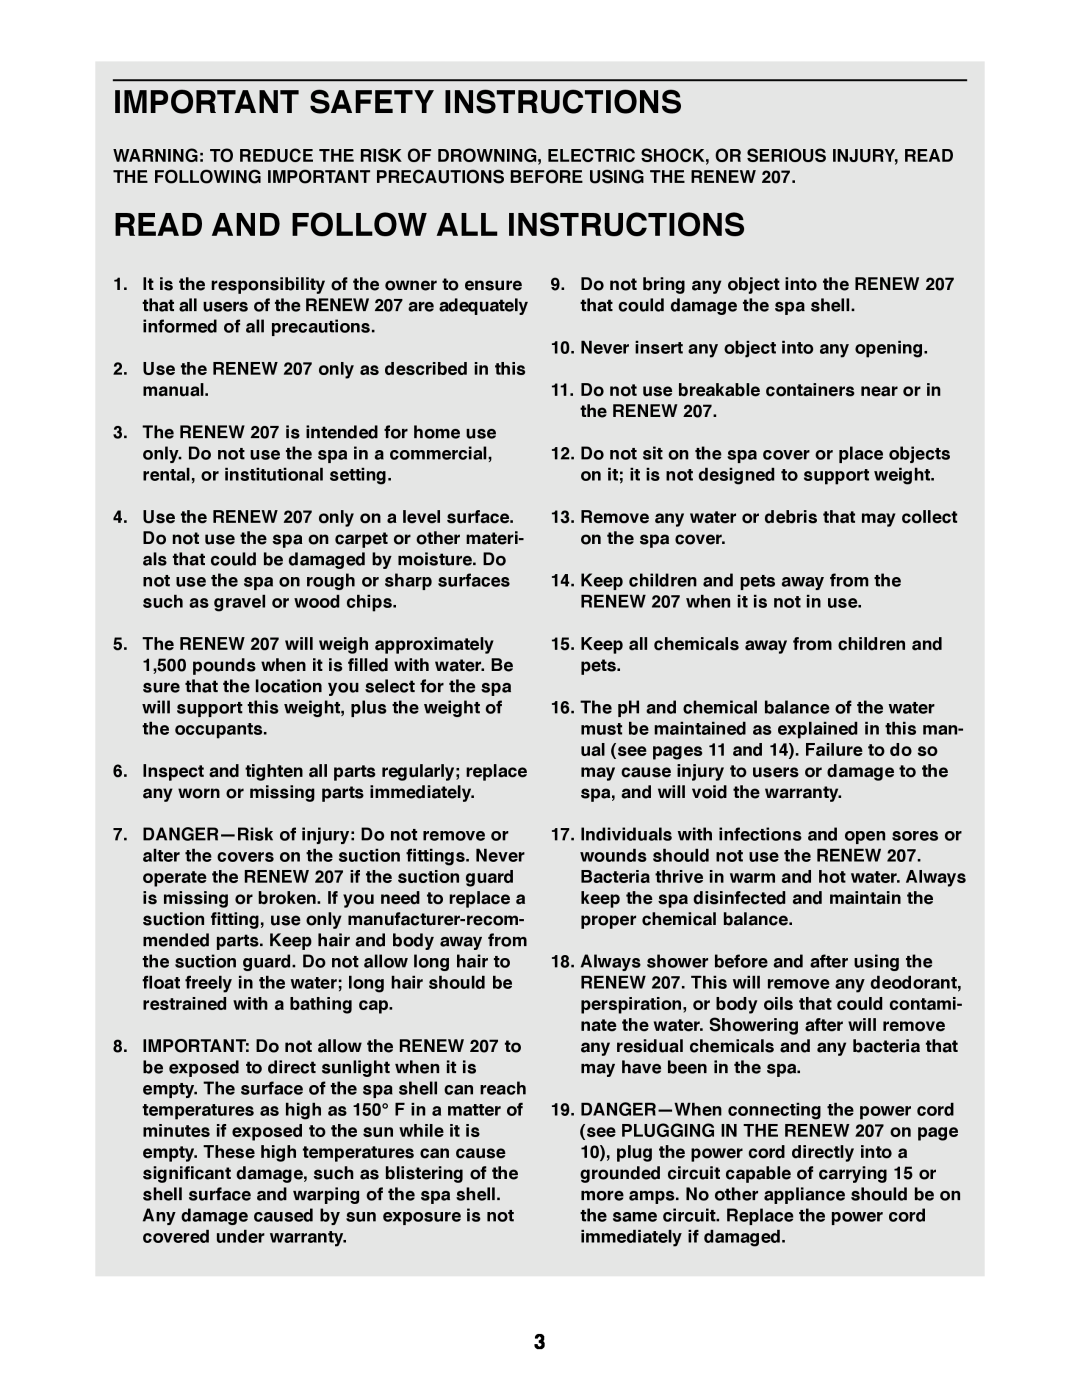 Image 831.21007 Important Safety Instructions, Read And Follow All Instructions, Never insert any object into any opening 